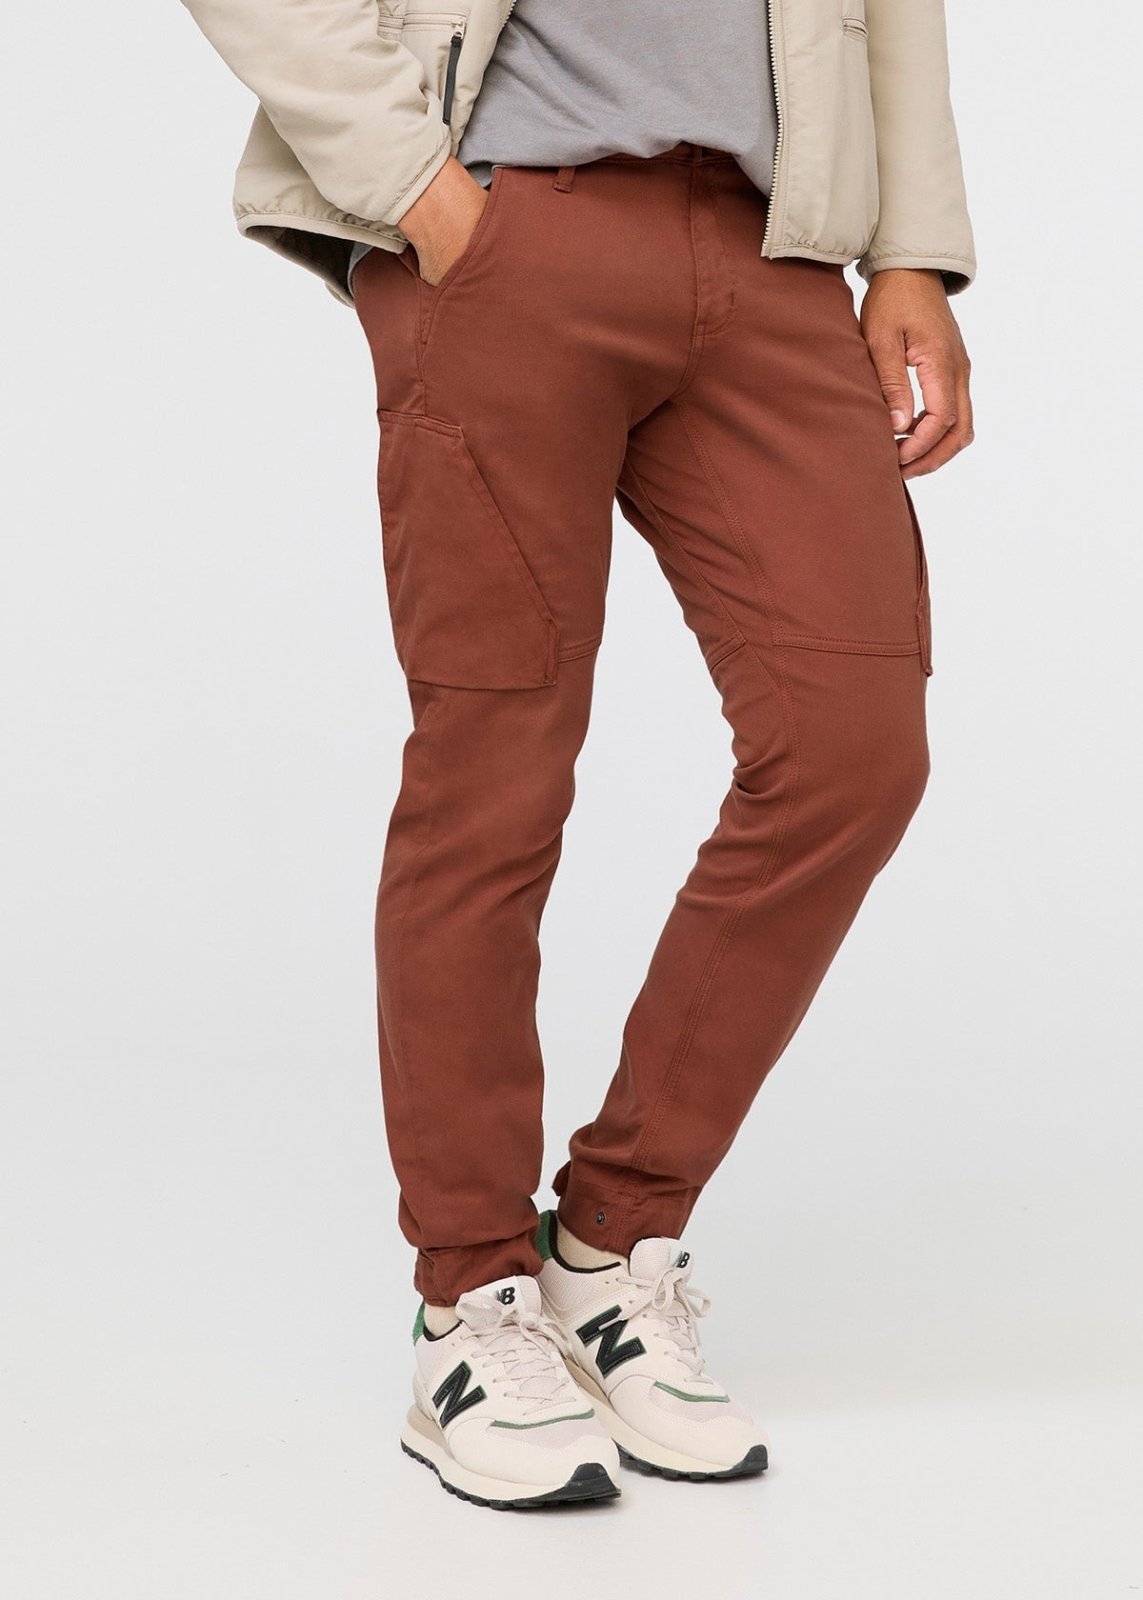 YUHAOTIN Joggers for Men Slim Fit Men's Cotton and Linen Straight